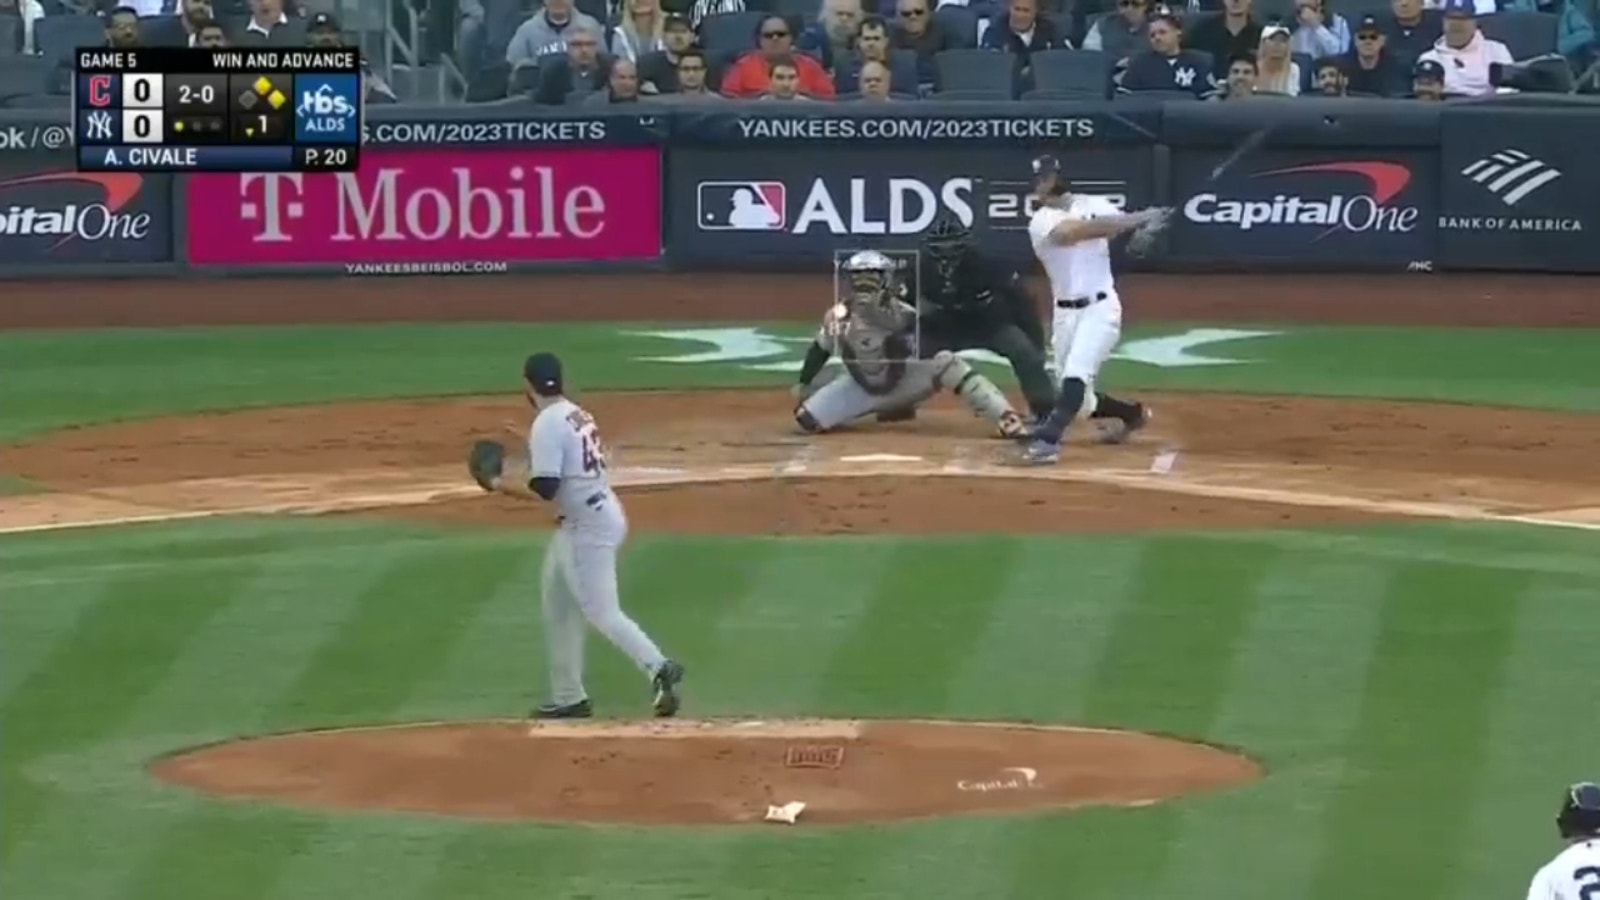 Giancarlo Stanton launches three-run home run to give Yankees early lead